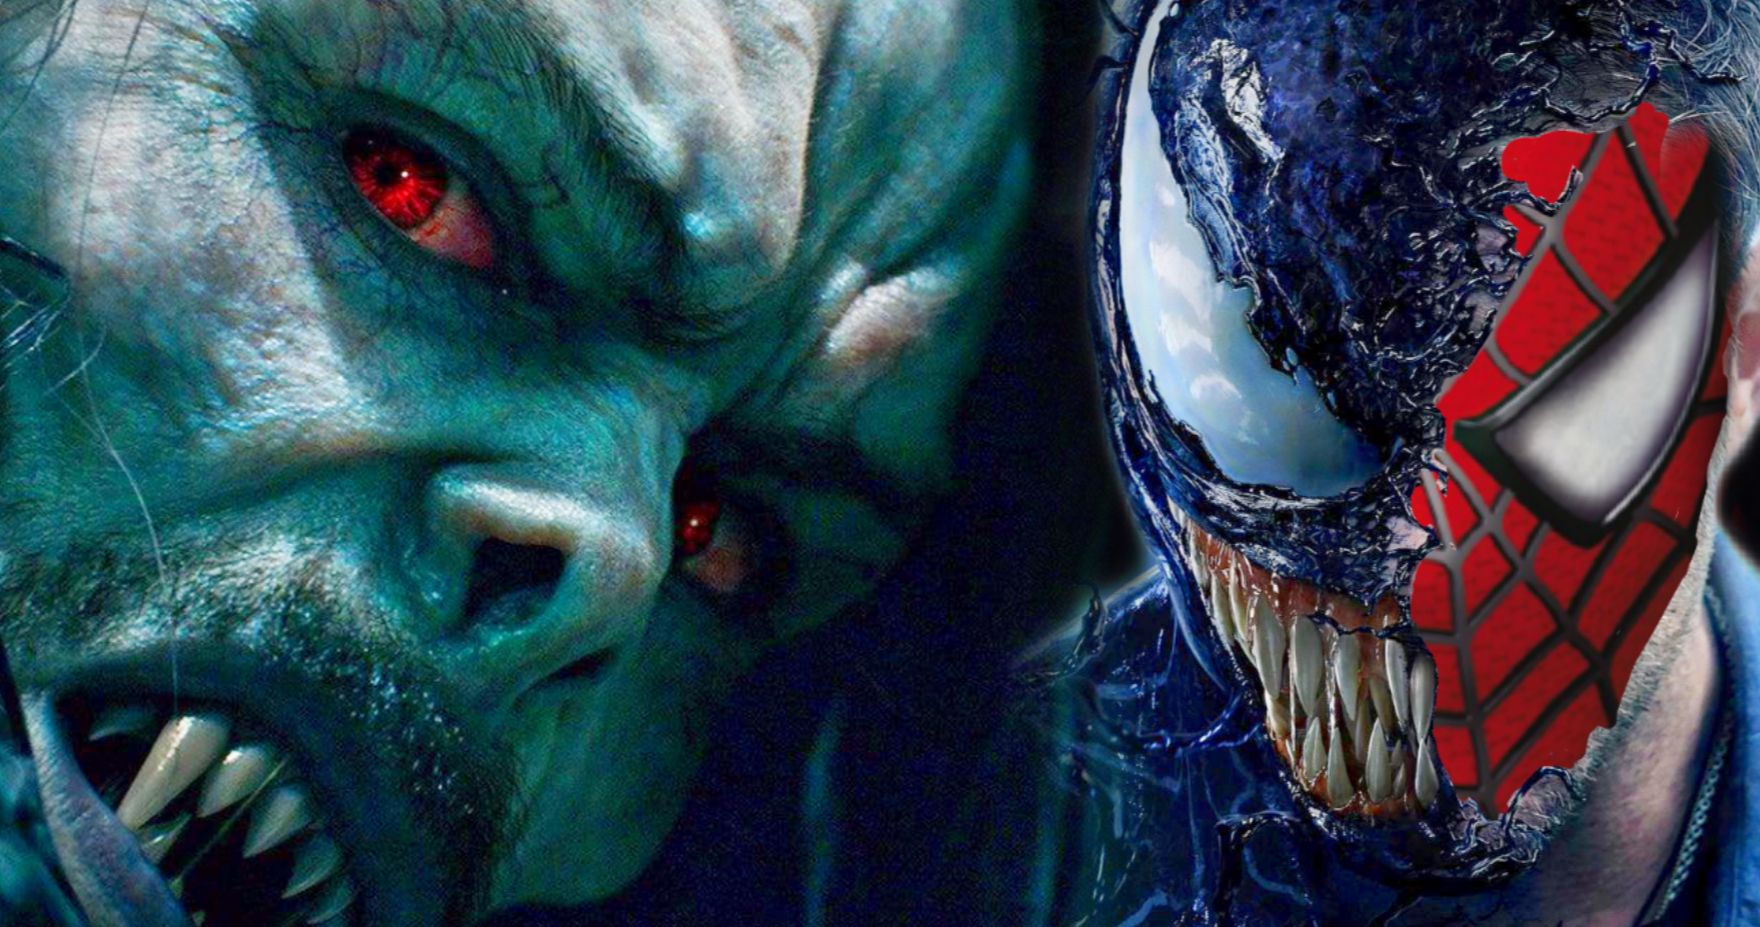 Venom 2 and Morbius Get Further Connected to the MCU in Latest Sony Viral Marketing